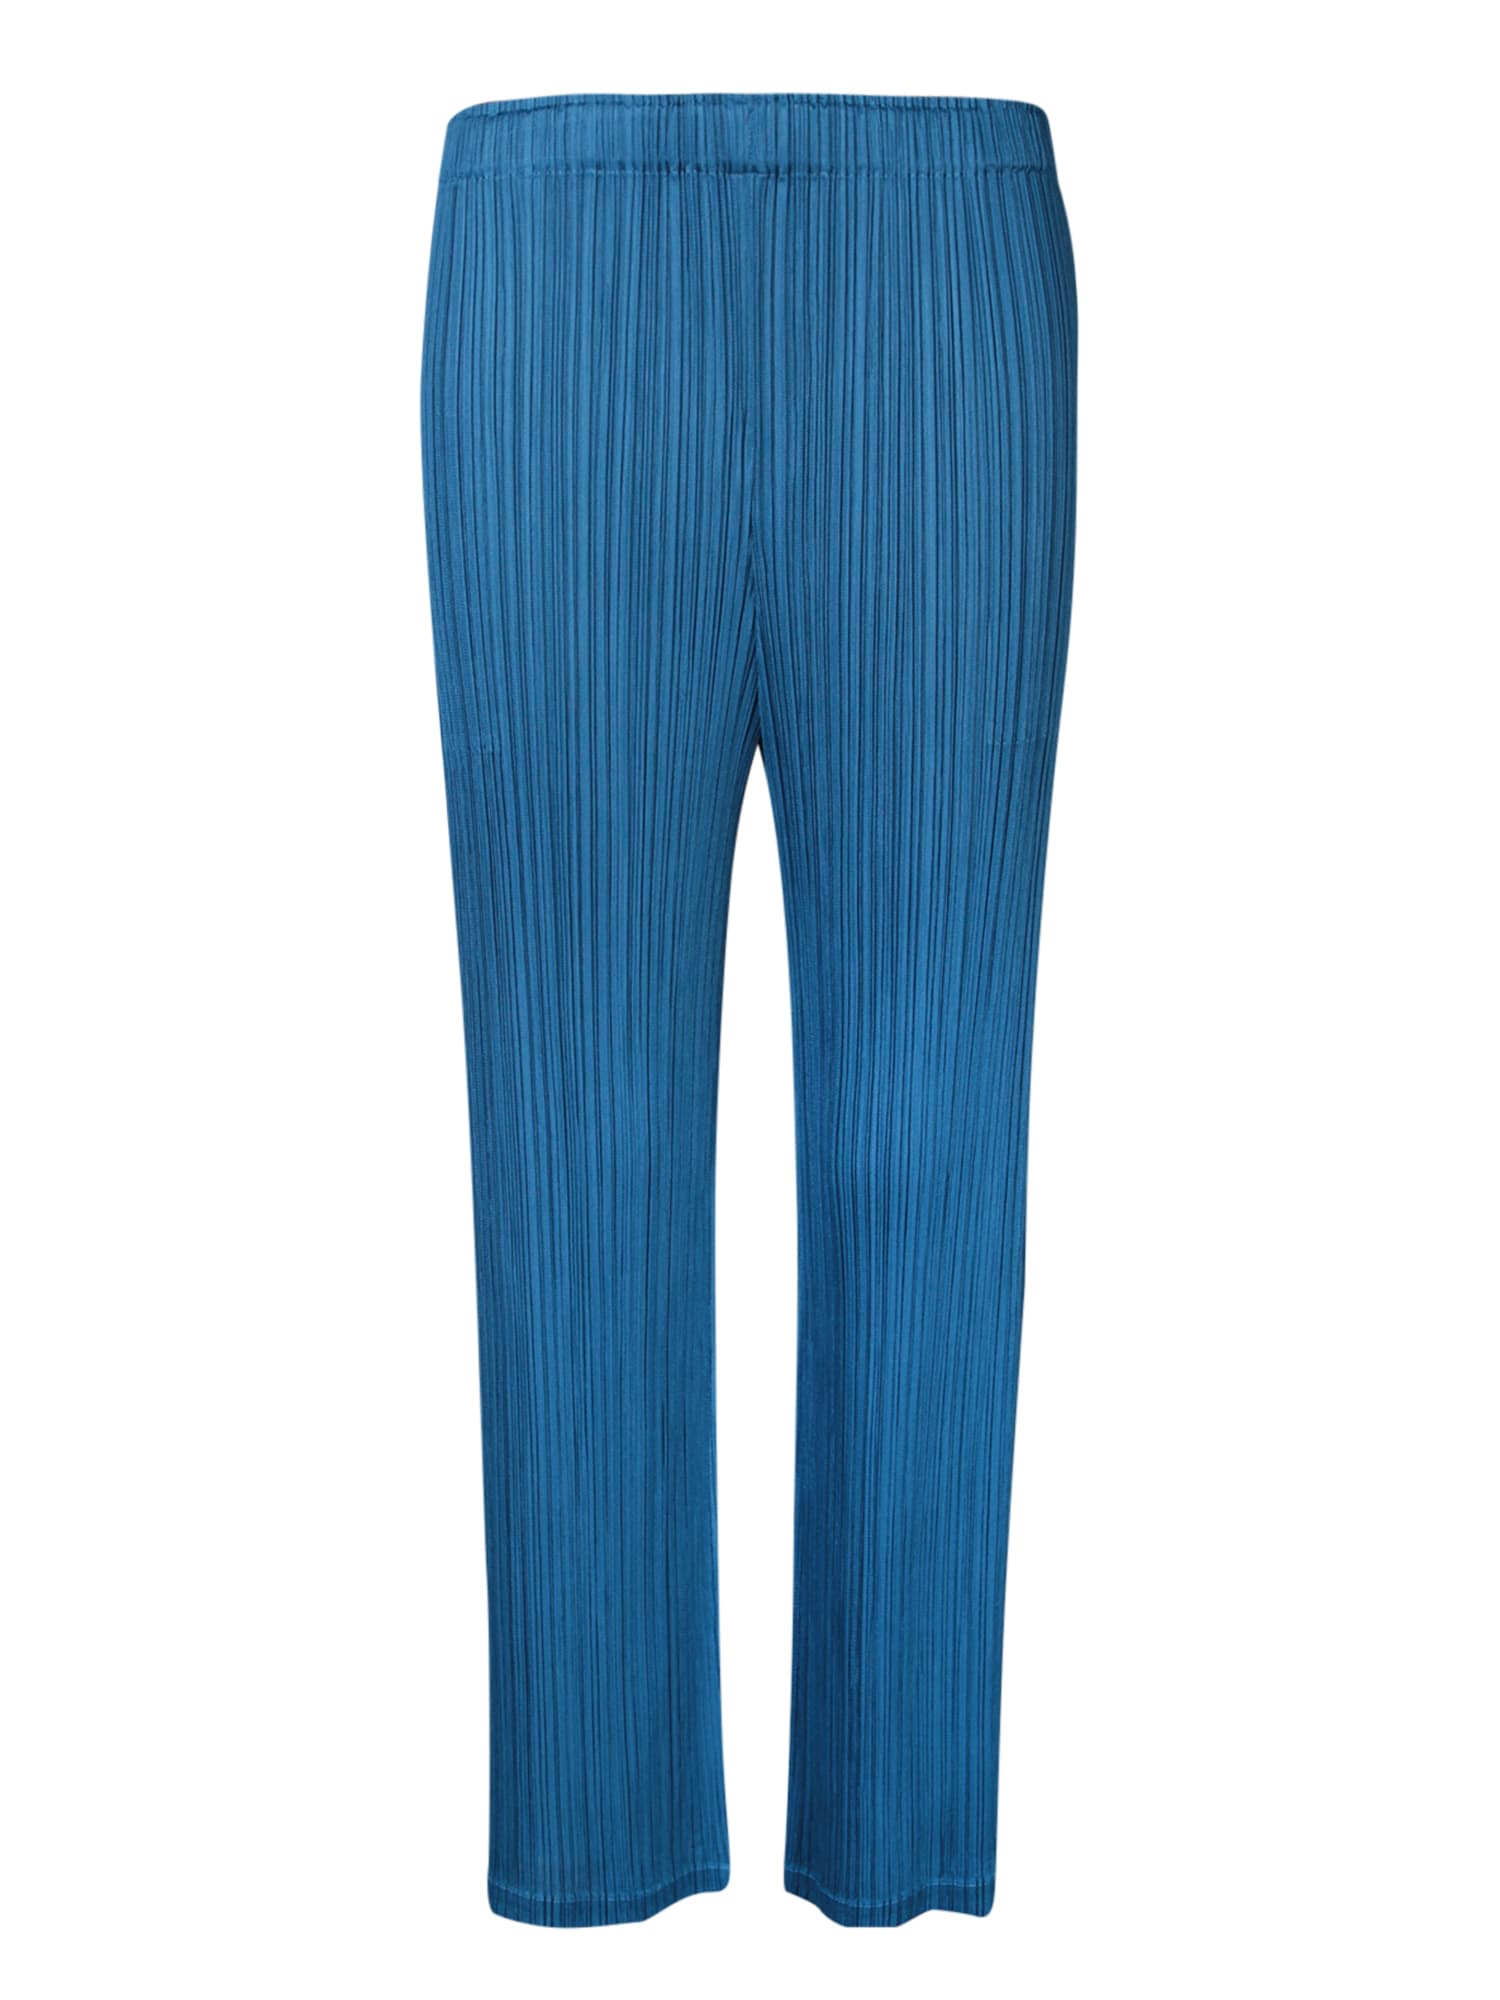 Issey Miyake Pleats Please Teal Trousers